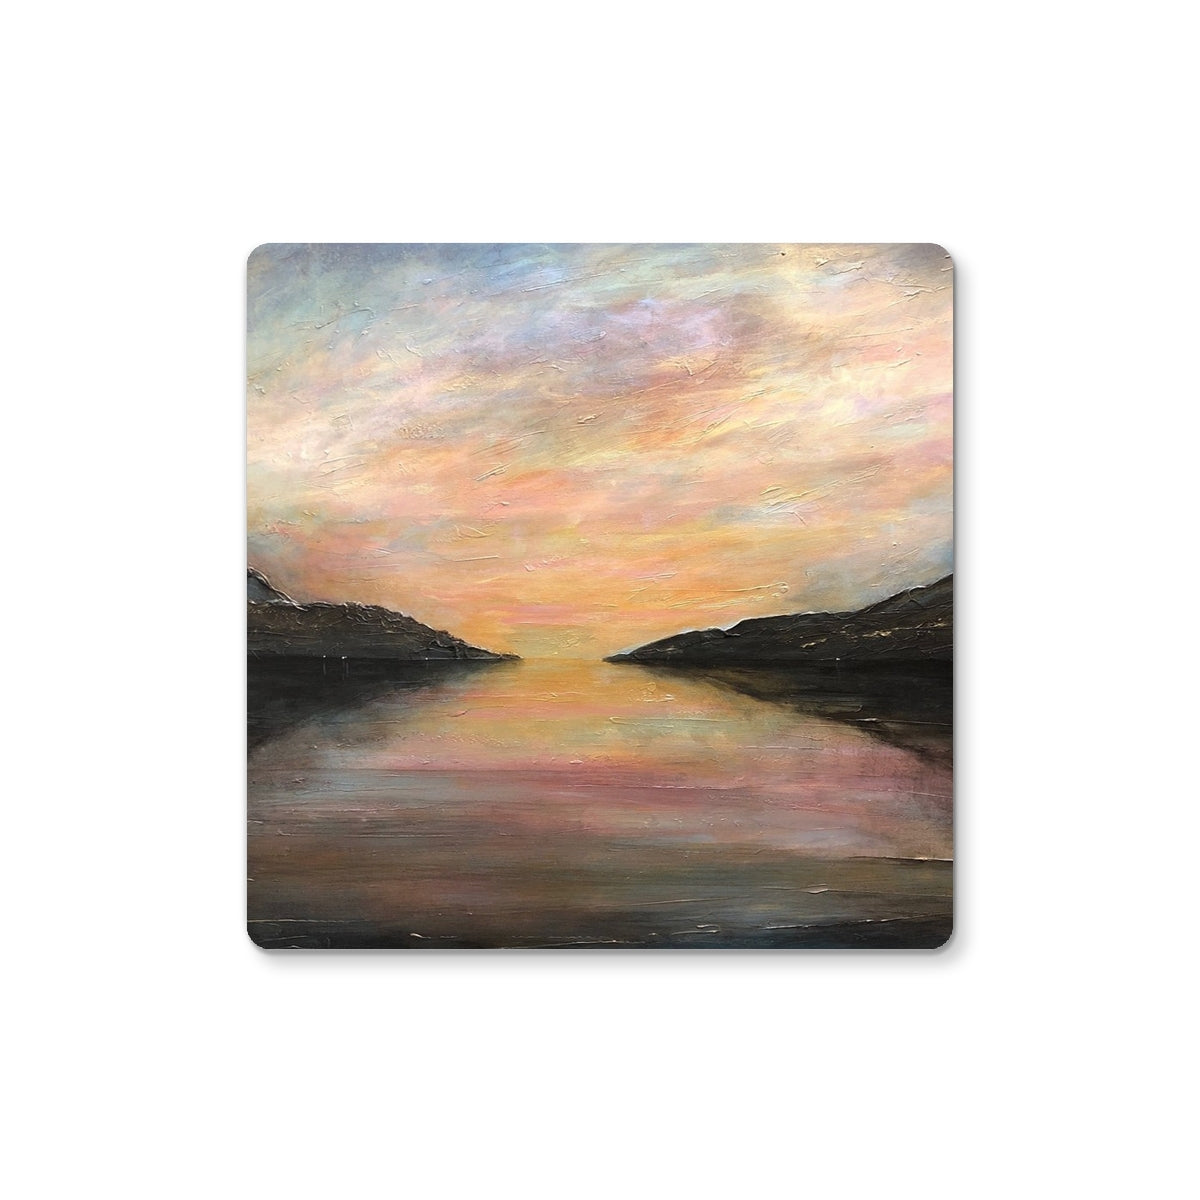 Loch Ness Glow Art Gifts Coaster-Homeware-Scottish Lochs & Mountains Art Gallery-2 Coasters-Paintings, Prints, Homeware, Art Gifts From Scotland By Scottish Artist Kevin Hunter